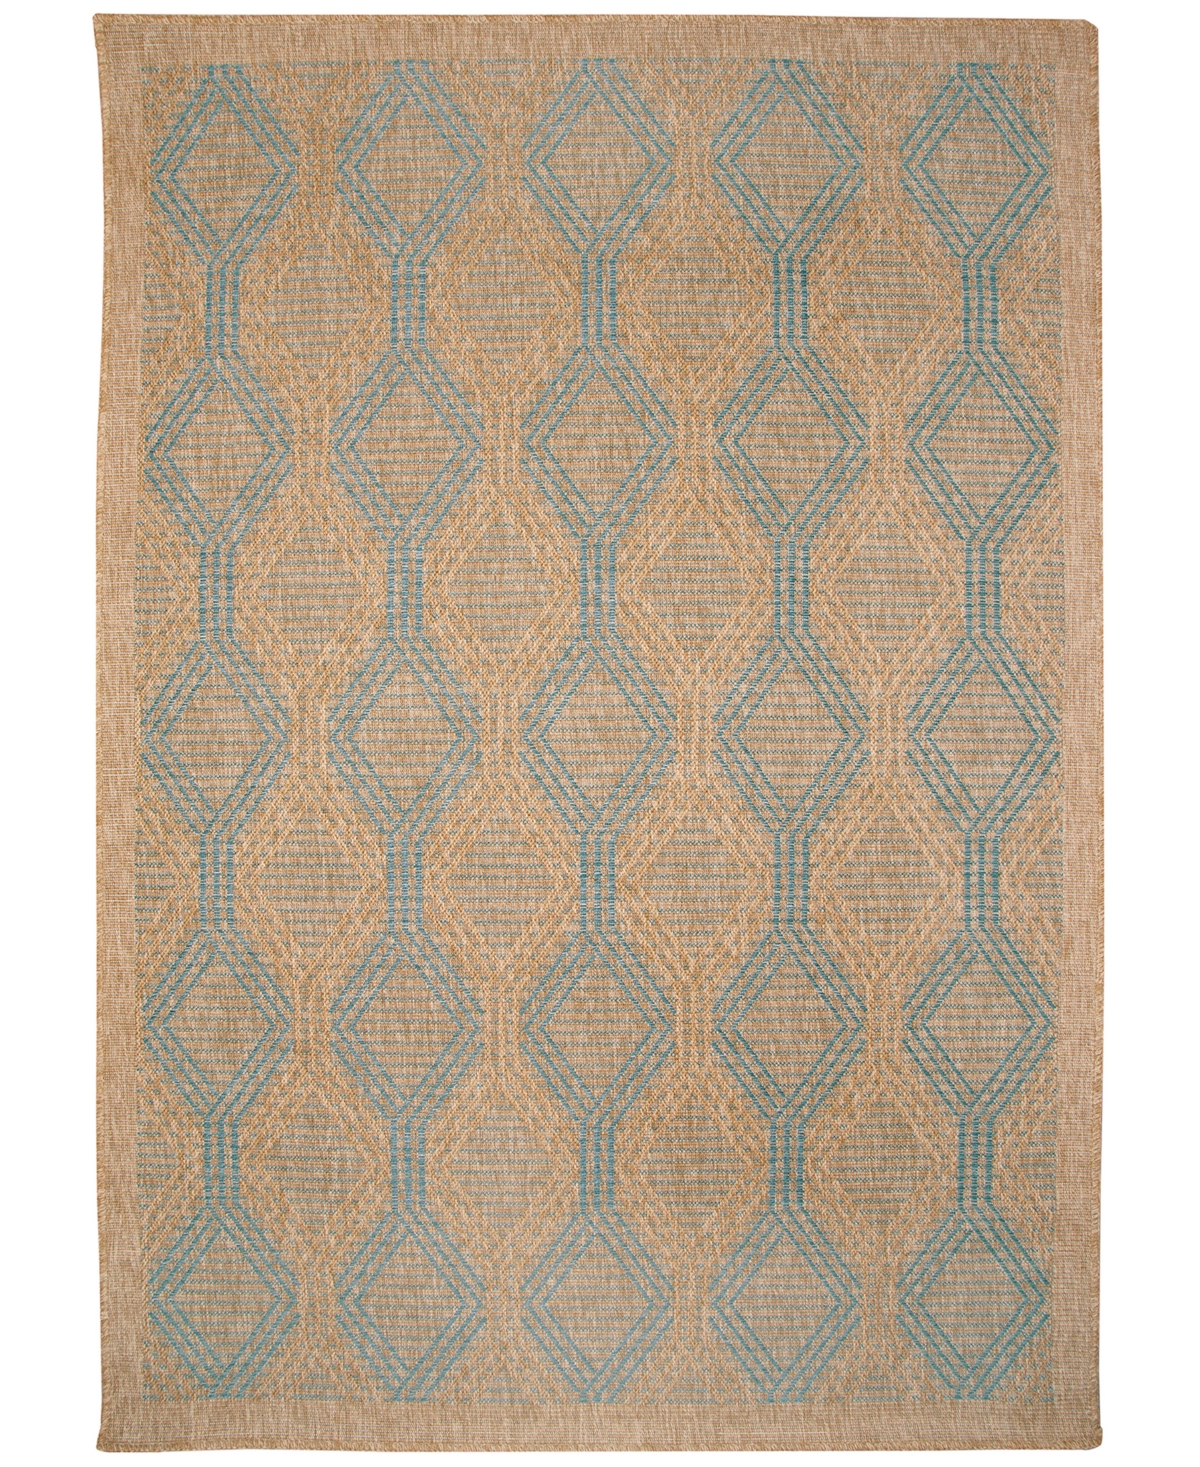 Liora Manne Sahara Links 6'6" X 9'3" Outdoor Area Rug In Turquoise